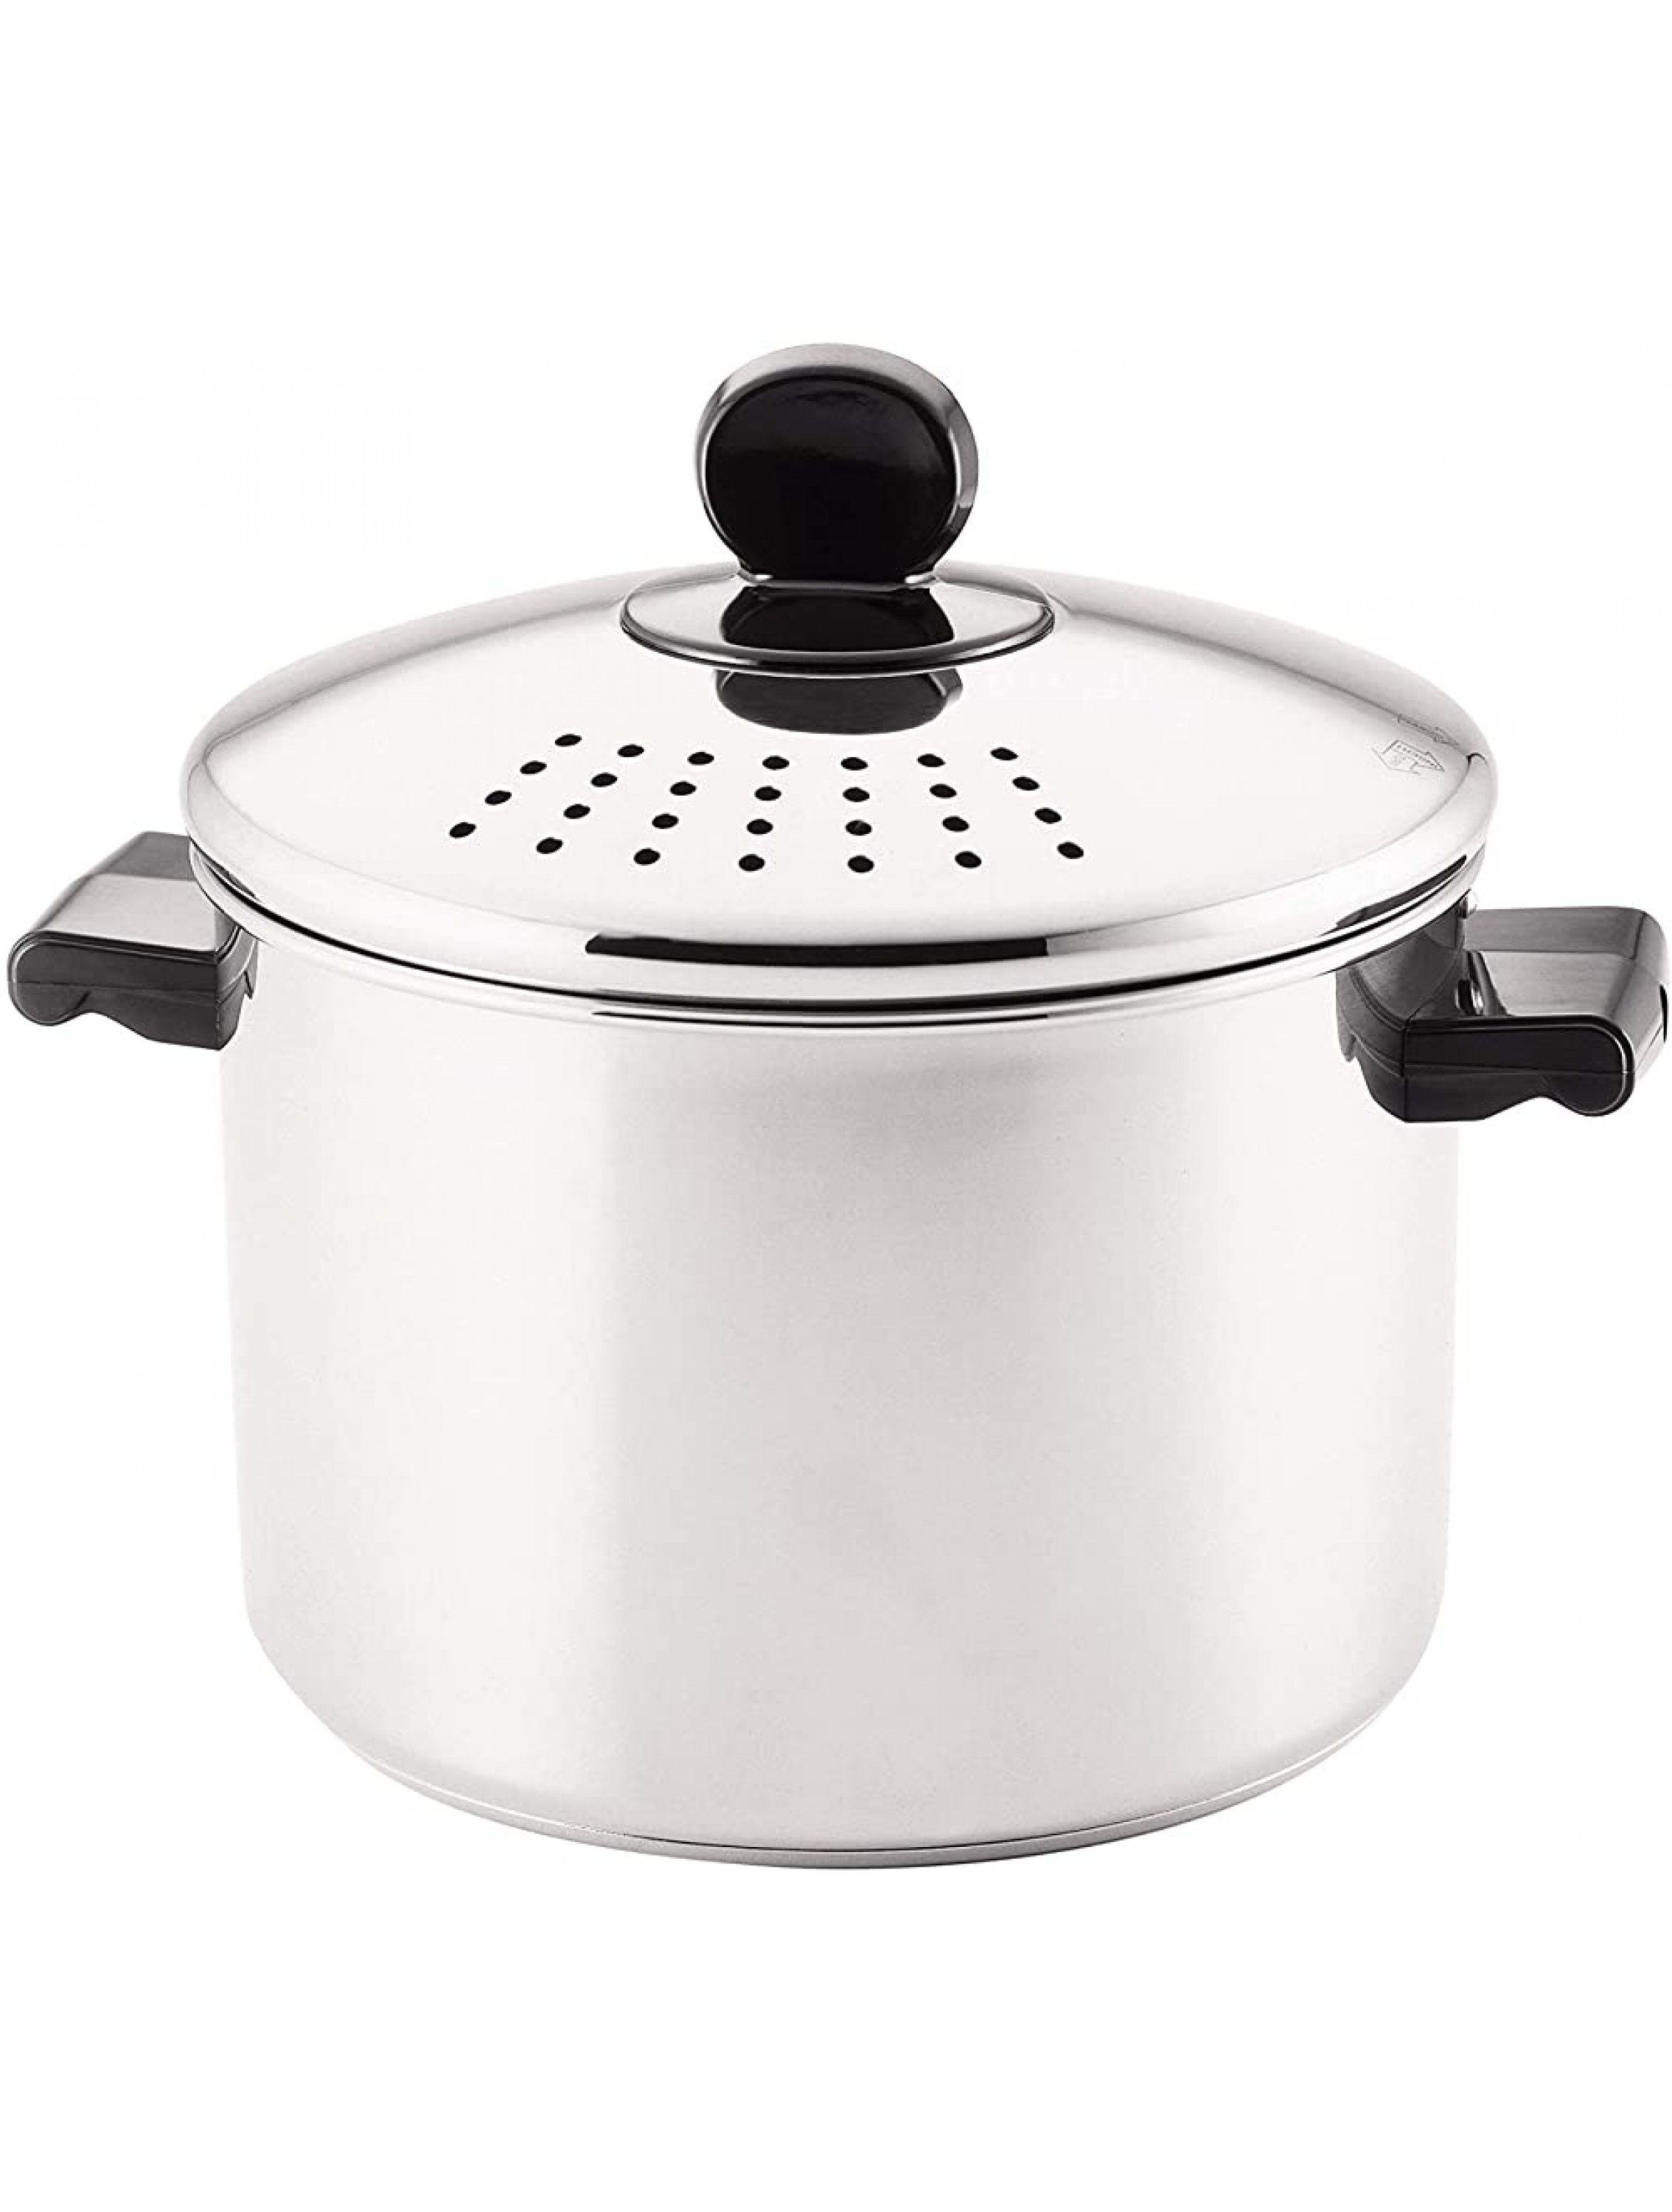 Farberware Classic Series Stainless Steel 8-Quart Covered Straining Stockpot with Lid Stainless Steel Pot with Lid Silver - BTPK4363N